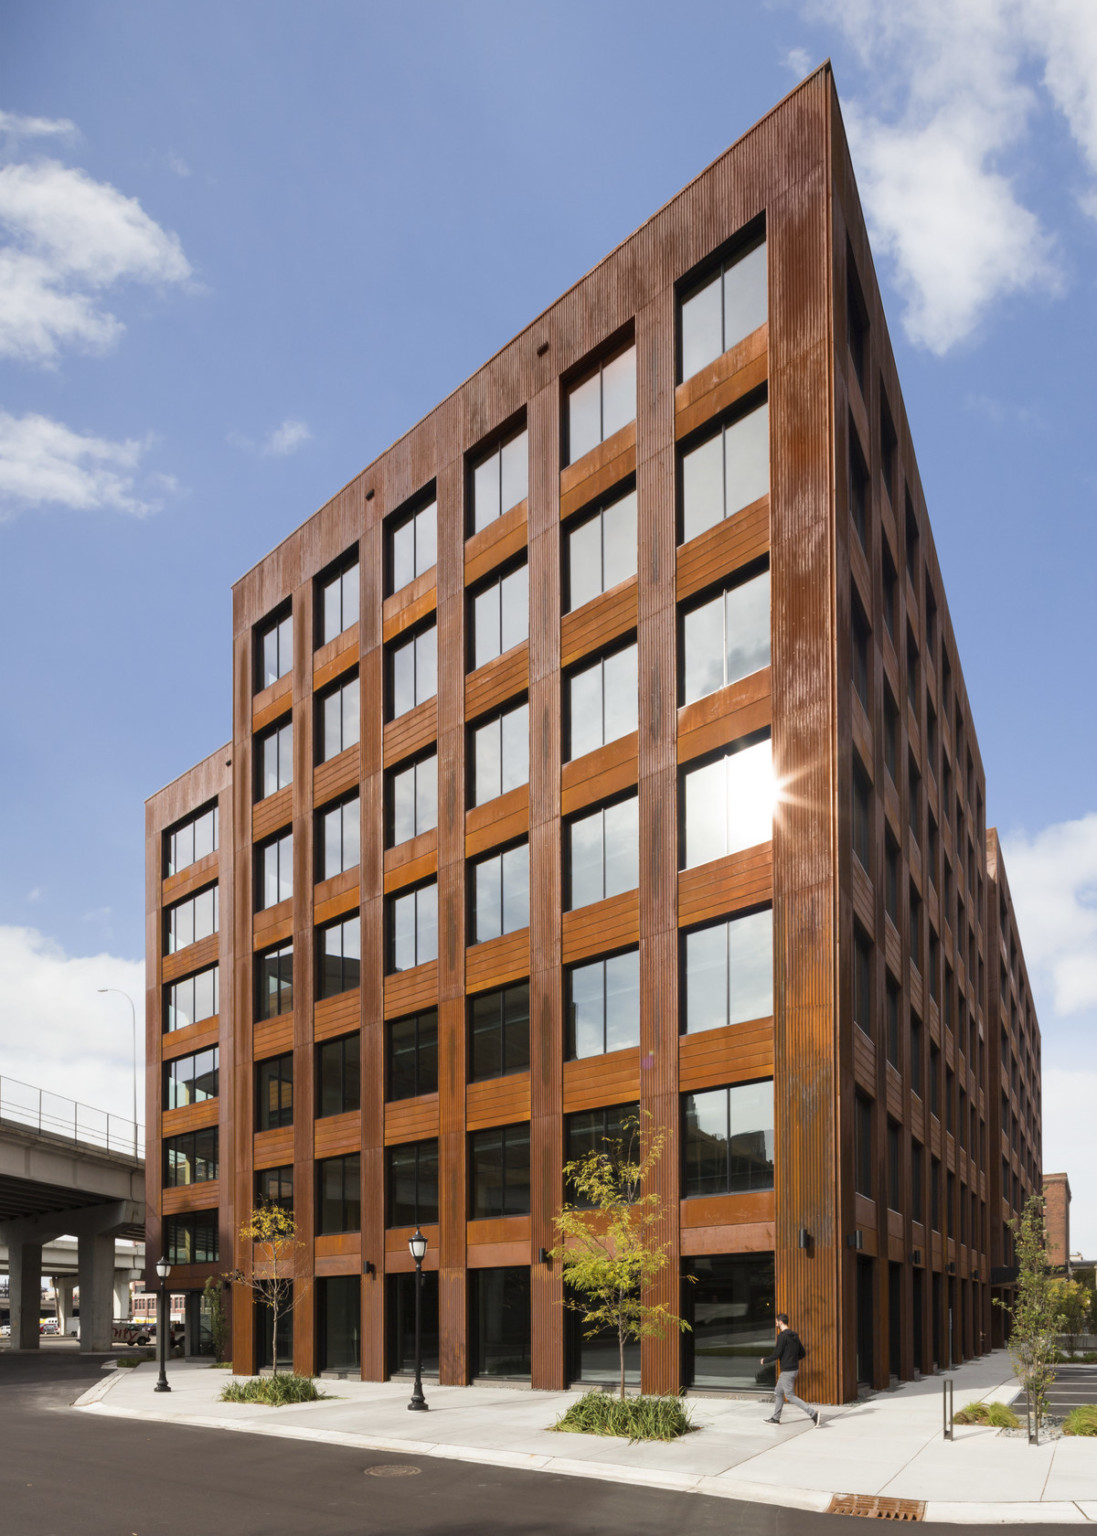 Corner view of mass timber building with large square windows